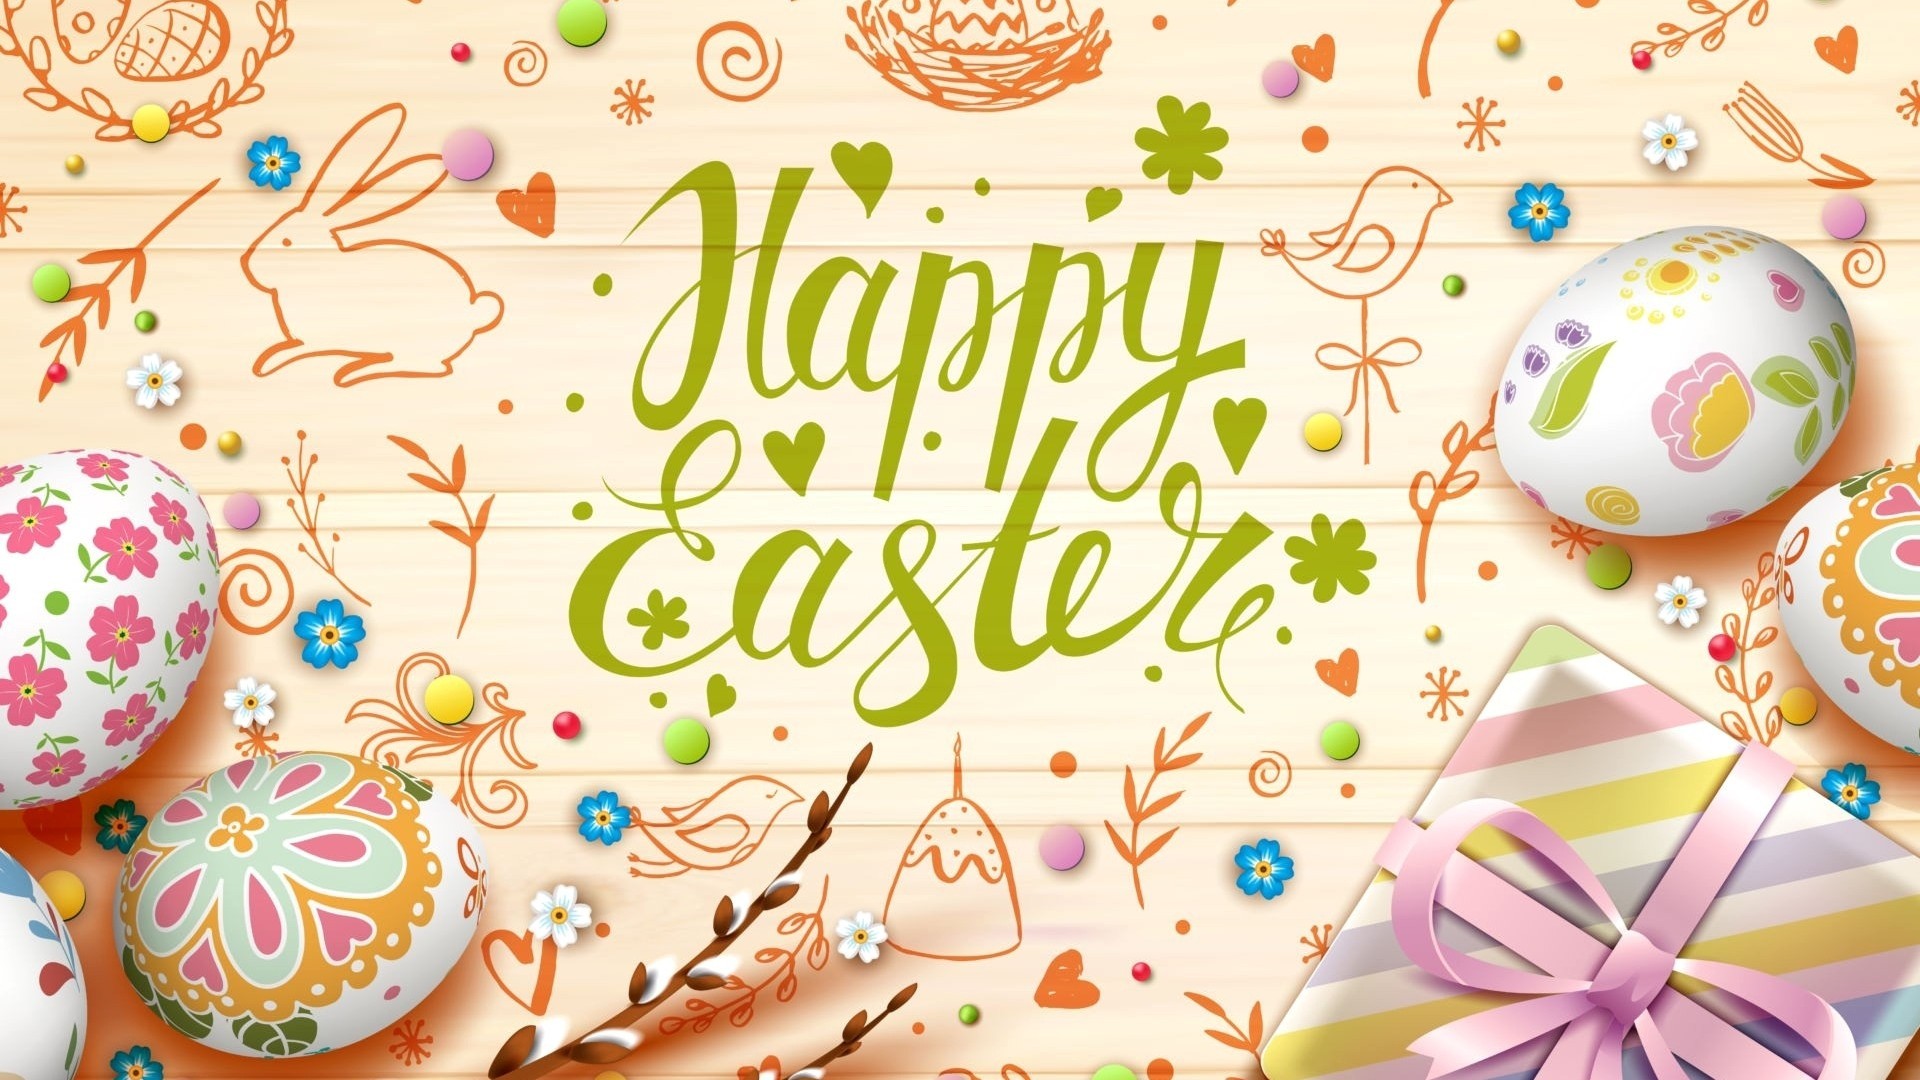 Download 1920x1080 Happy Easter Wallpapers for Widescreen 1920x1080